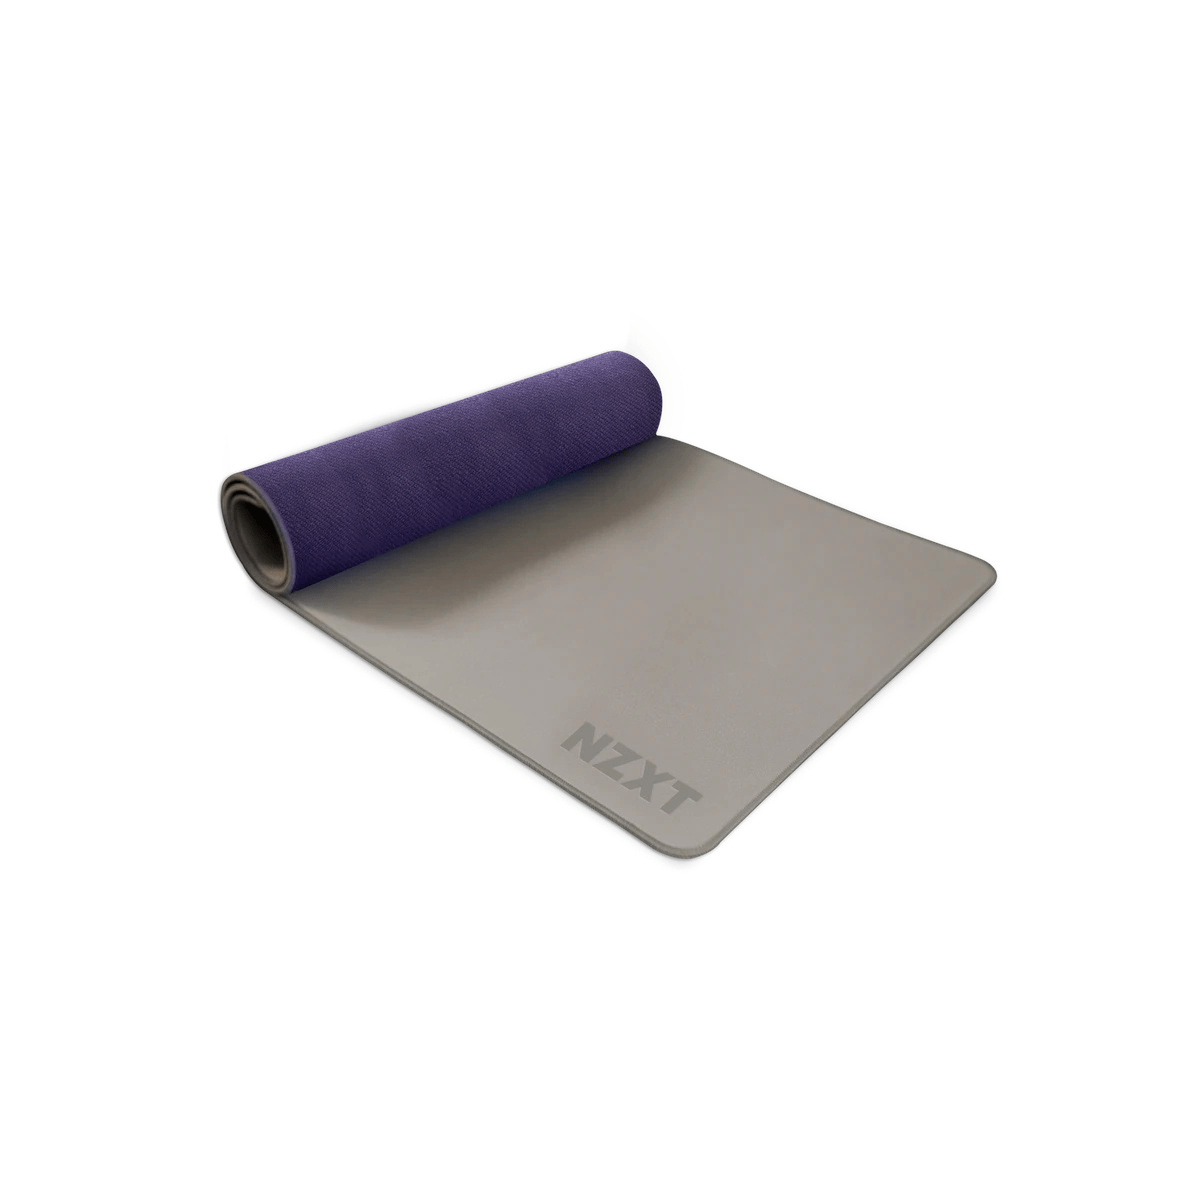 NZXT Mouse Pad MMP400 Gris SMALL 41 cm X 35 cm MM-SMSSP-GR - GG GAMER STORE